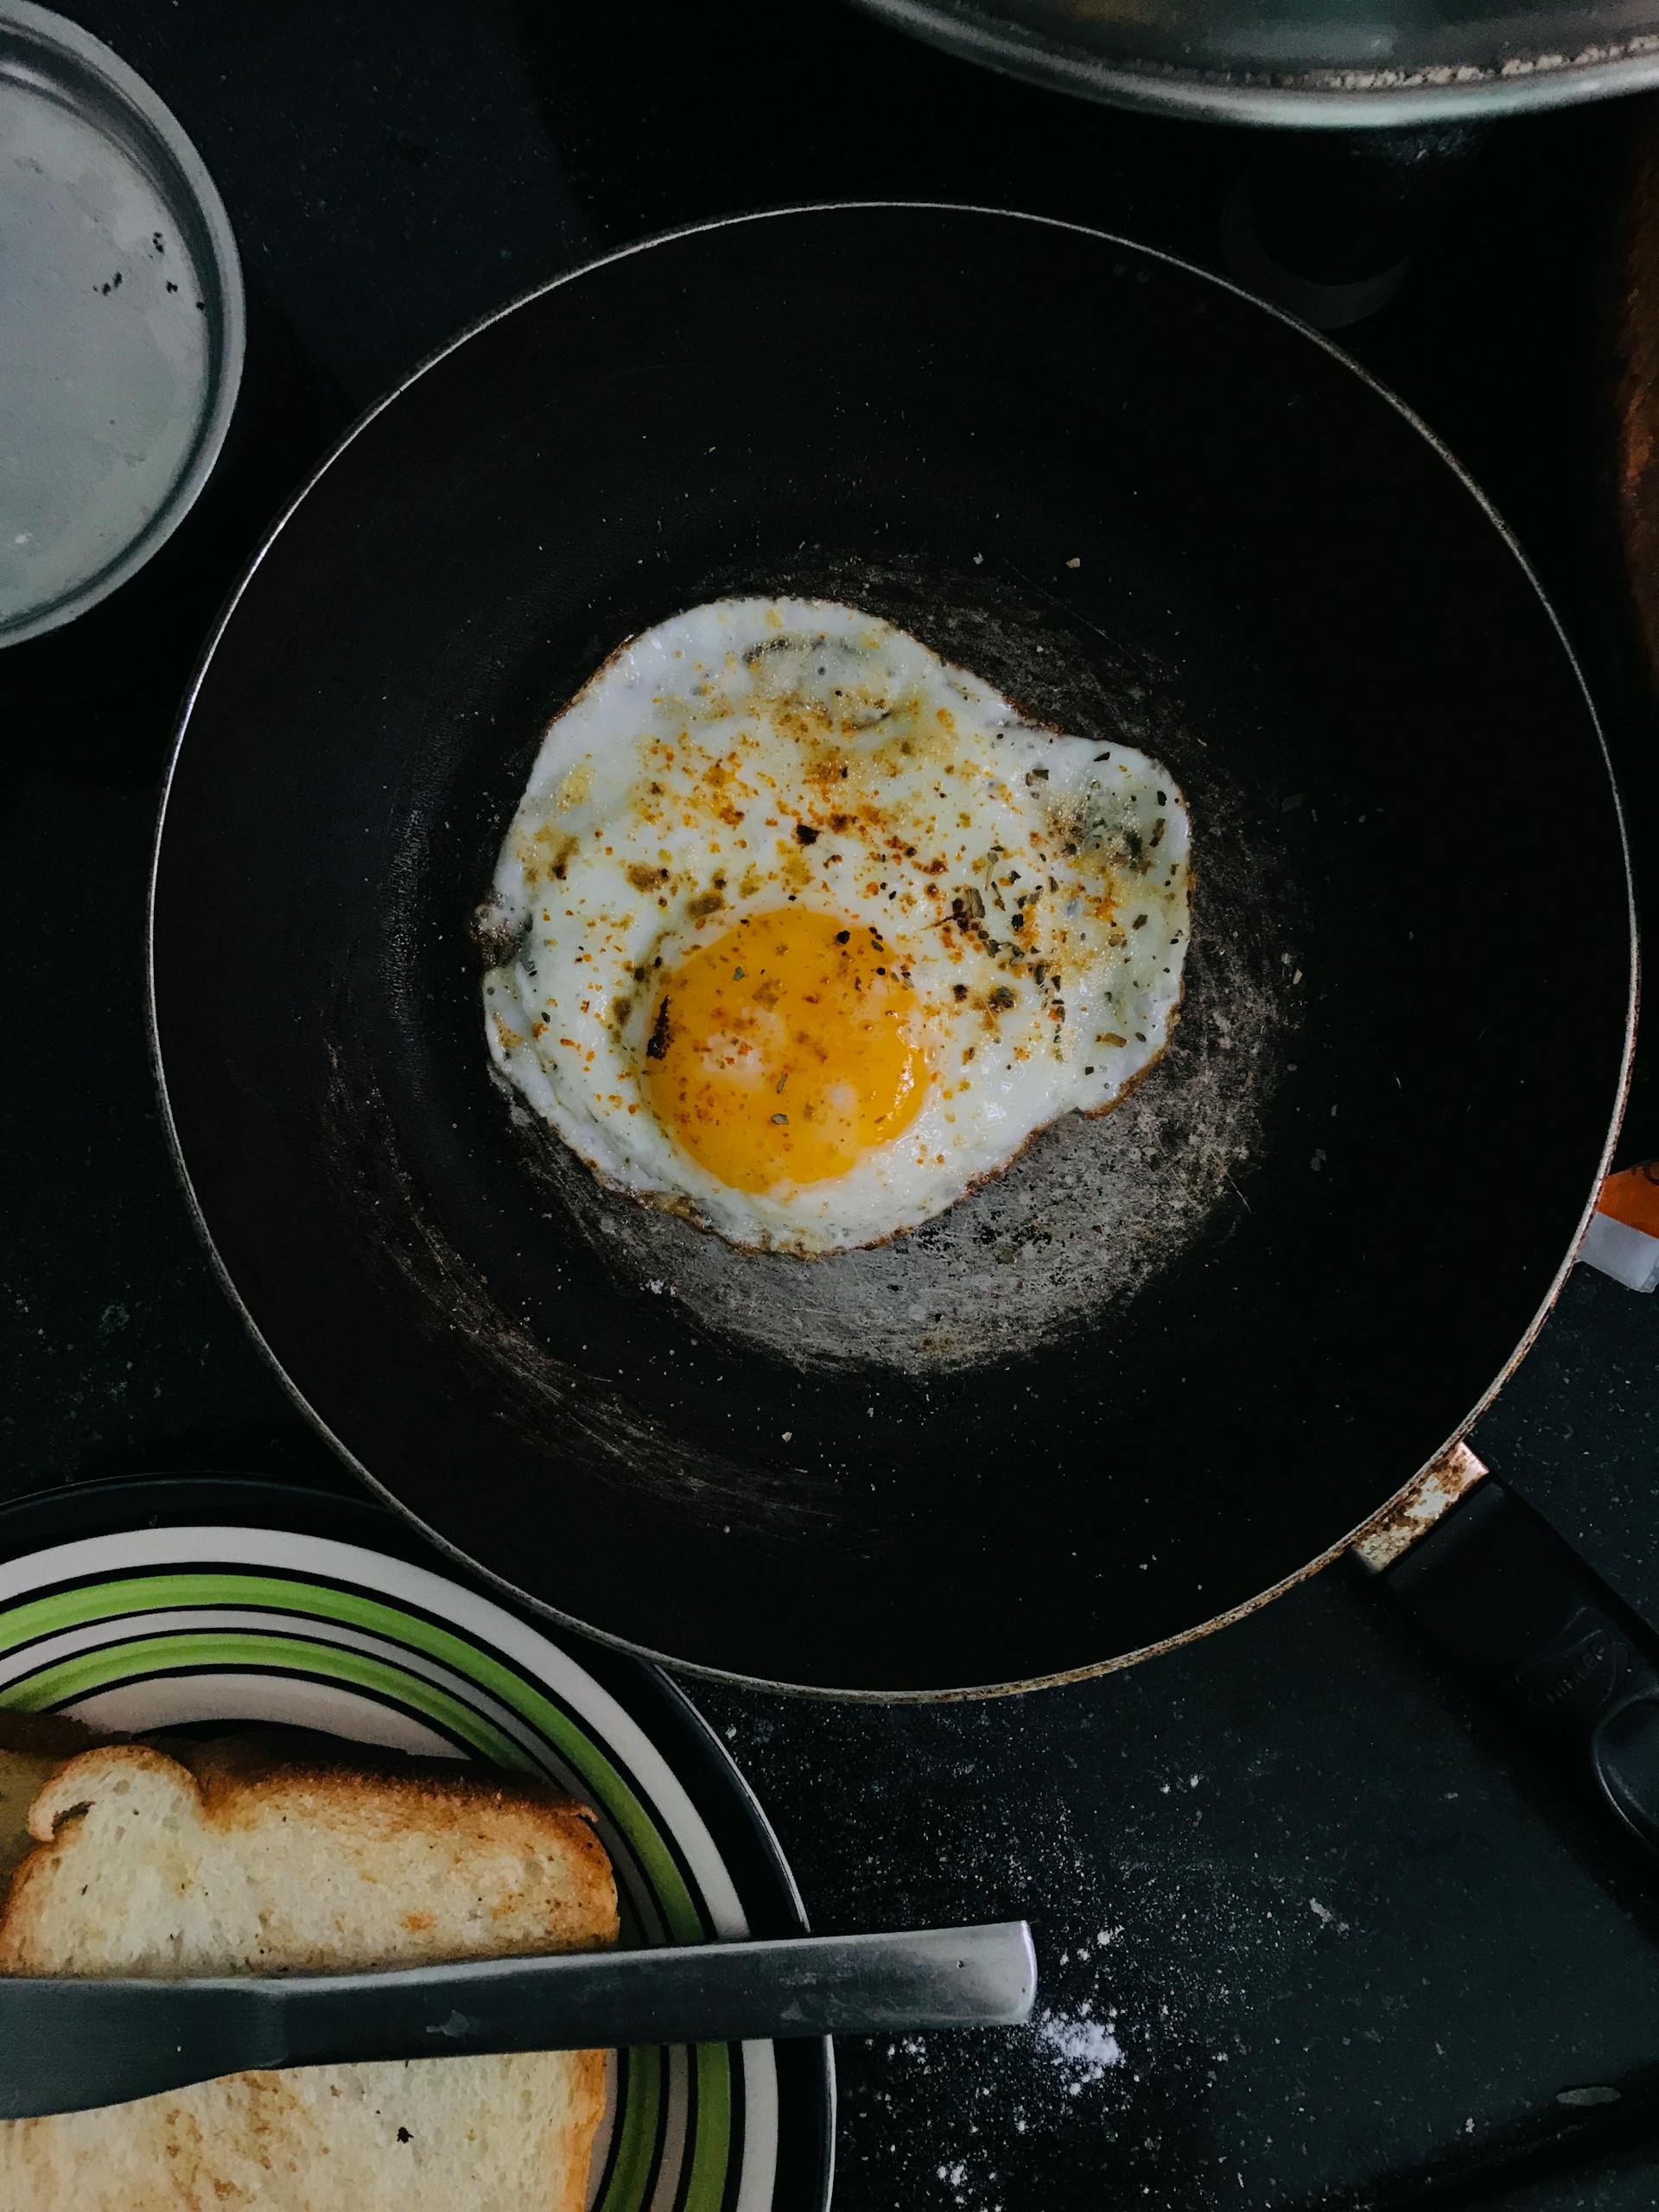 A egg being cooked in a pan | Source: Pexels